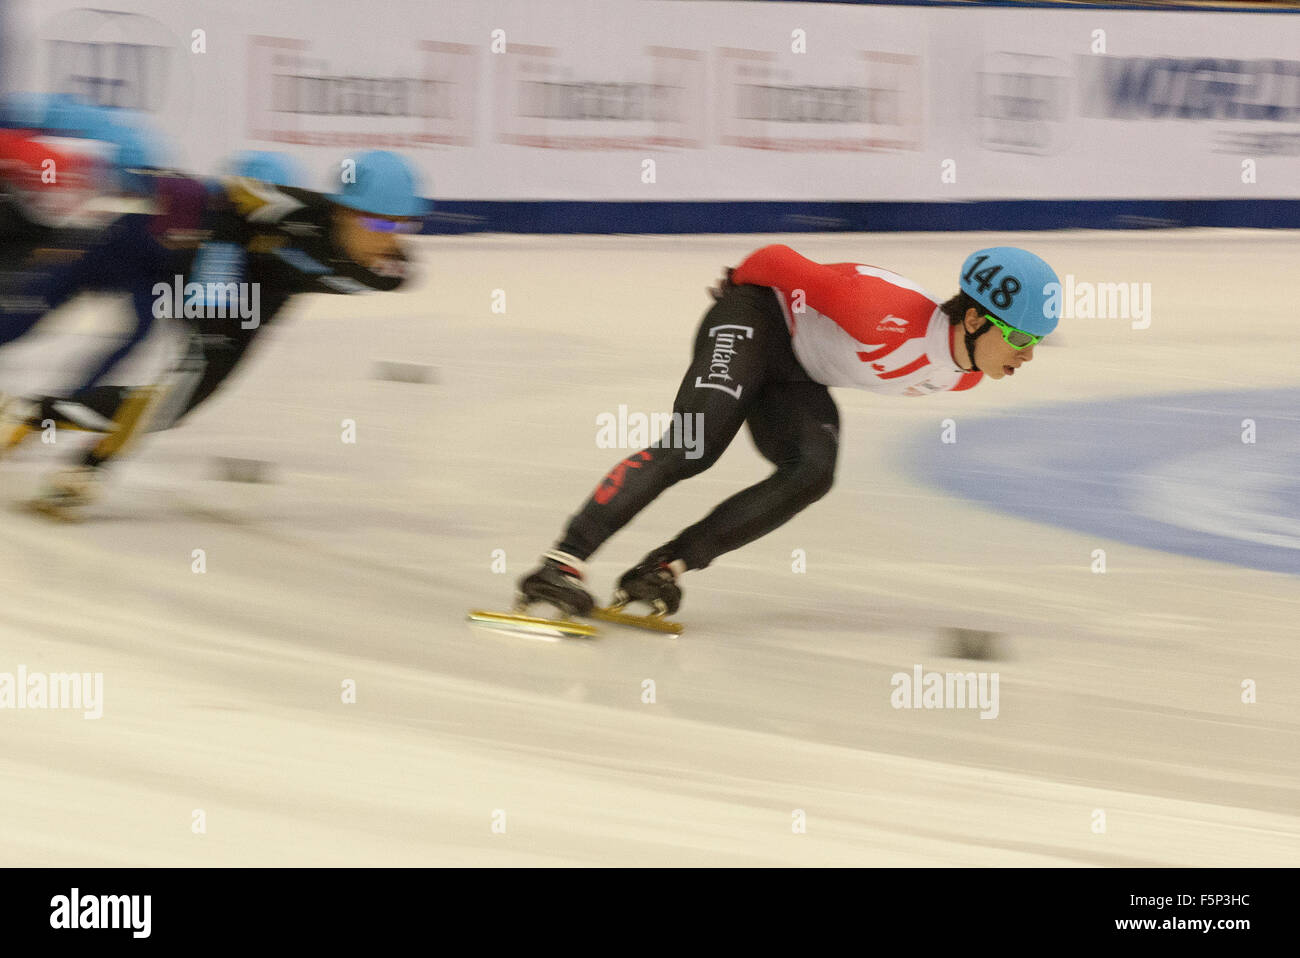 Toronto, Canada. 7 November 2015: ISU World Cup Short Track, Toronto - Charle Ciurnoyer (148) (CAN) competes in the men's 1500m semi-final. Photo: Peter Llewellyn/Alamy Live News Stock Photo